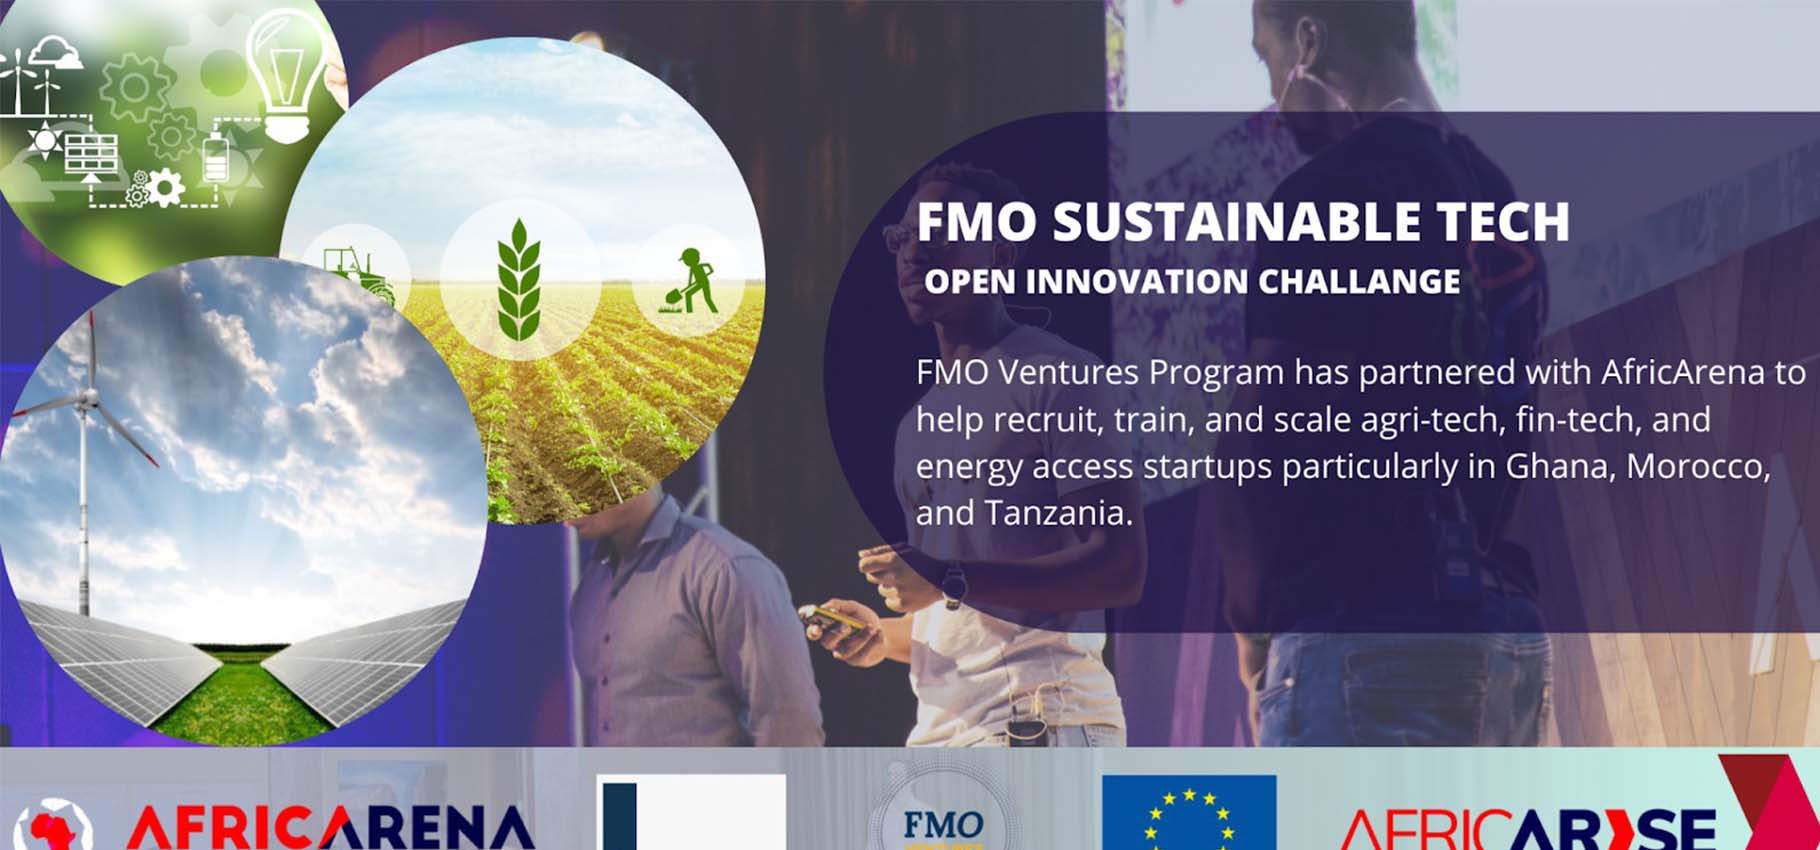 FMO announces its support for the AfricArise program to help accelerate tech startups in Ghana, Morocco and Tanzania